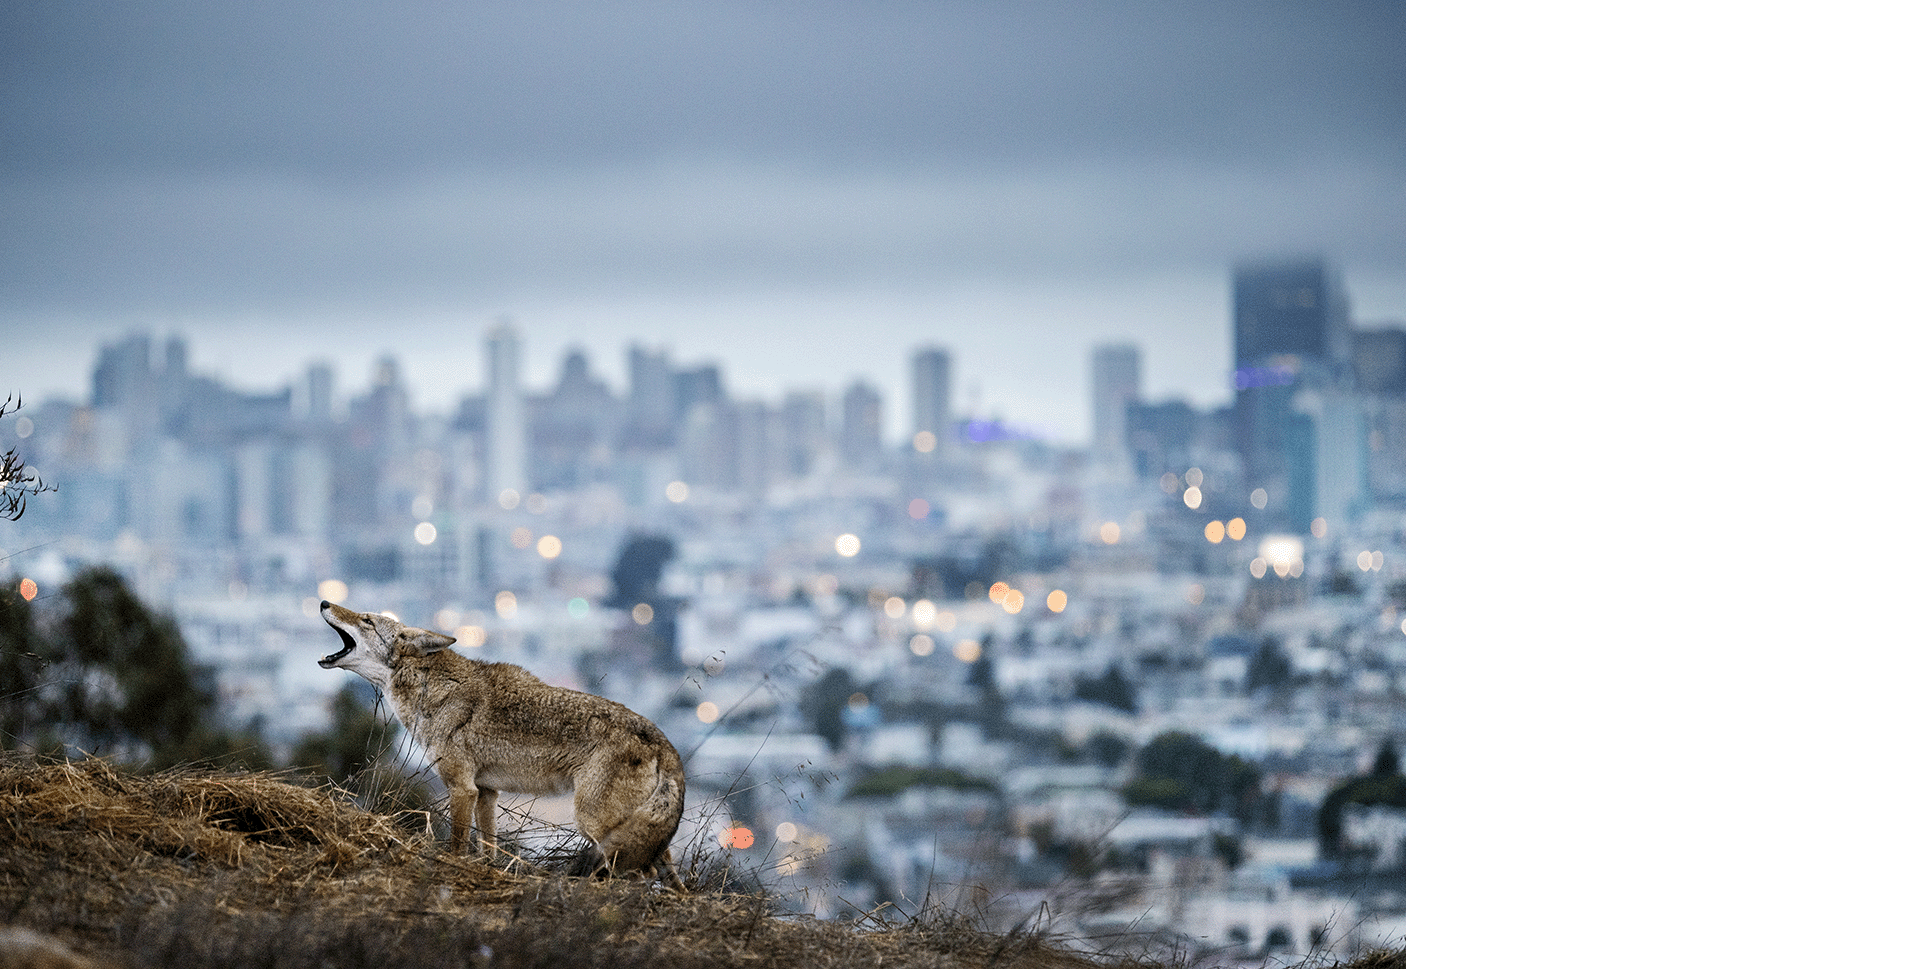 A coyote yips in a park with San Francisco skyline in the background. Photo by Corey Arnold